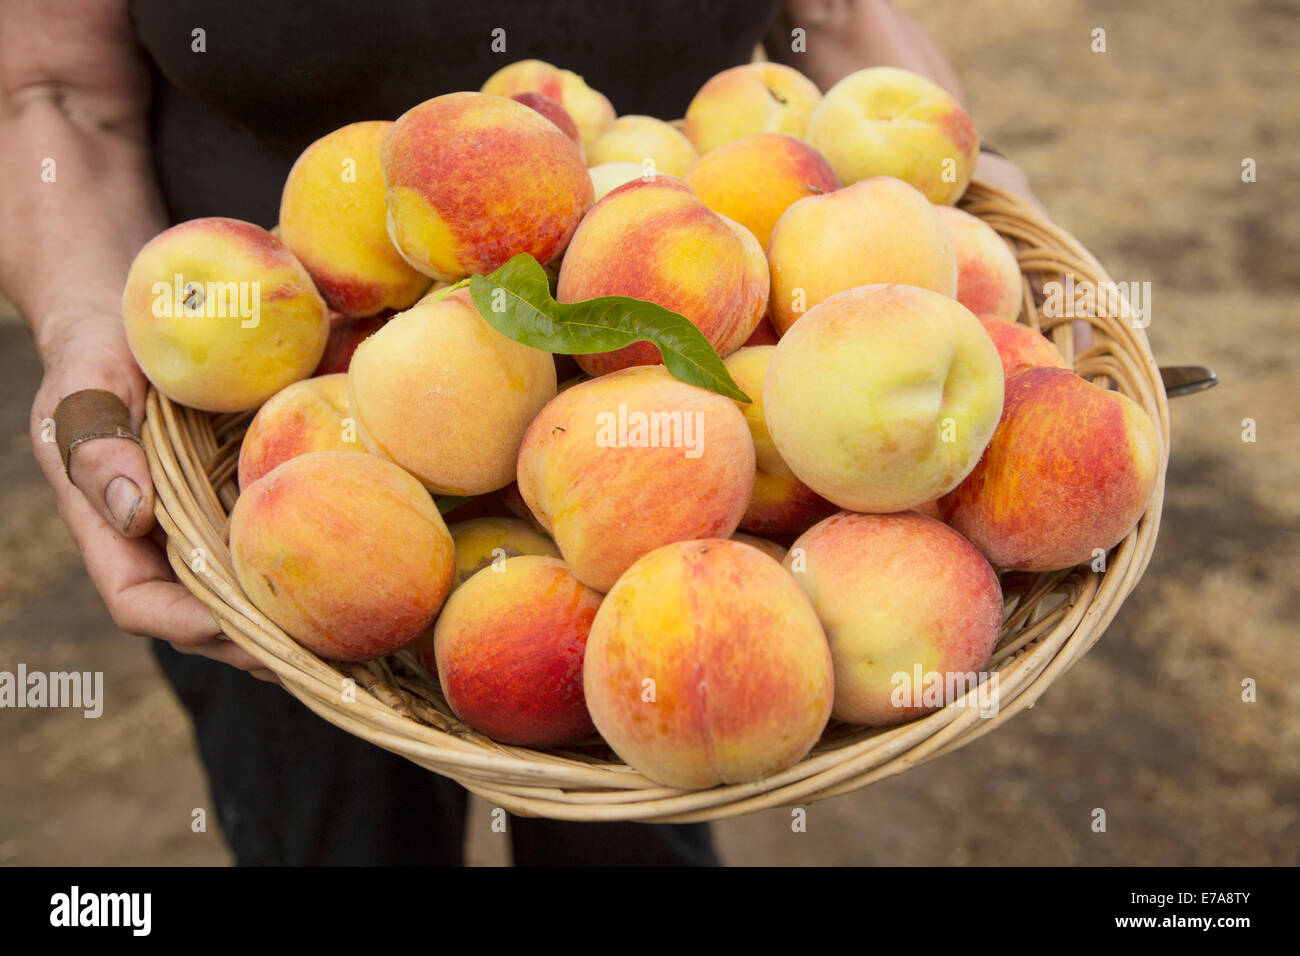 Midsection of man carrying basket full of peaches Stock Photo